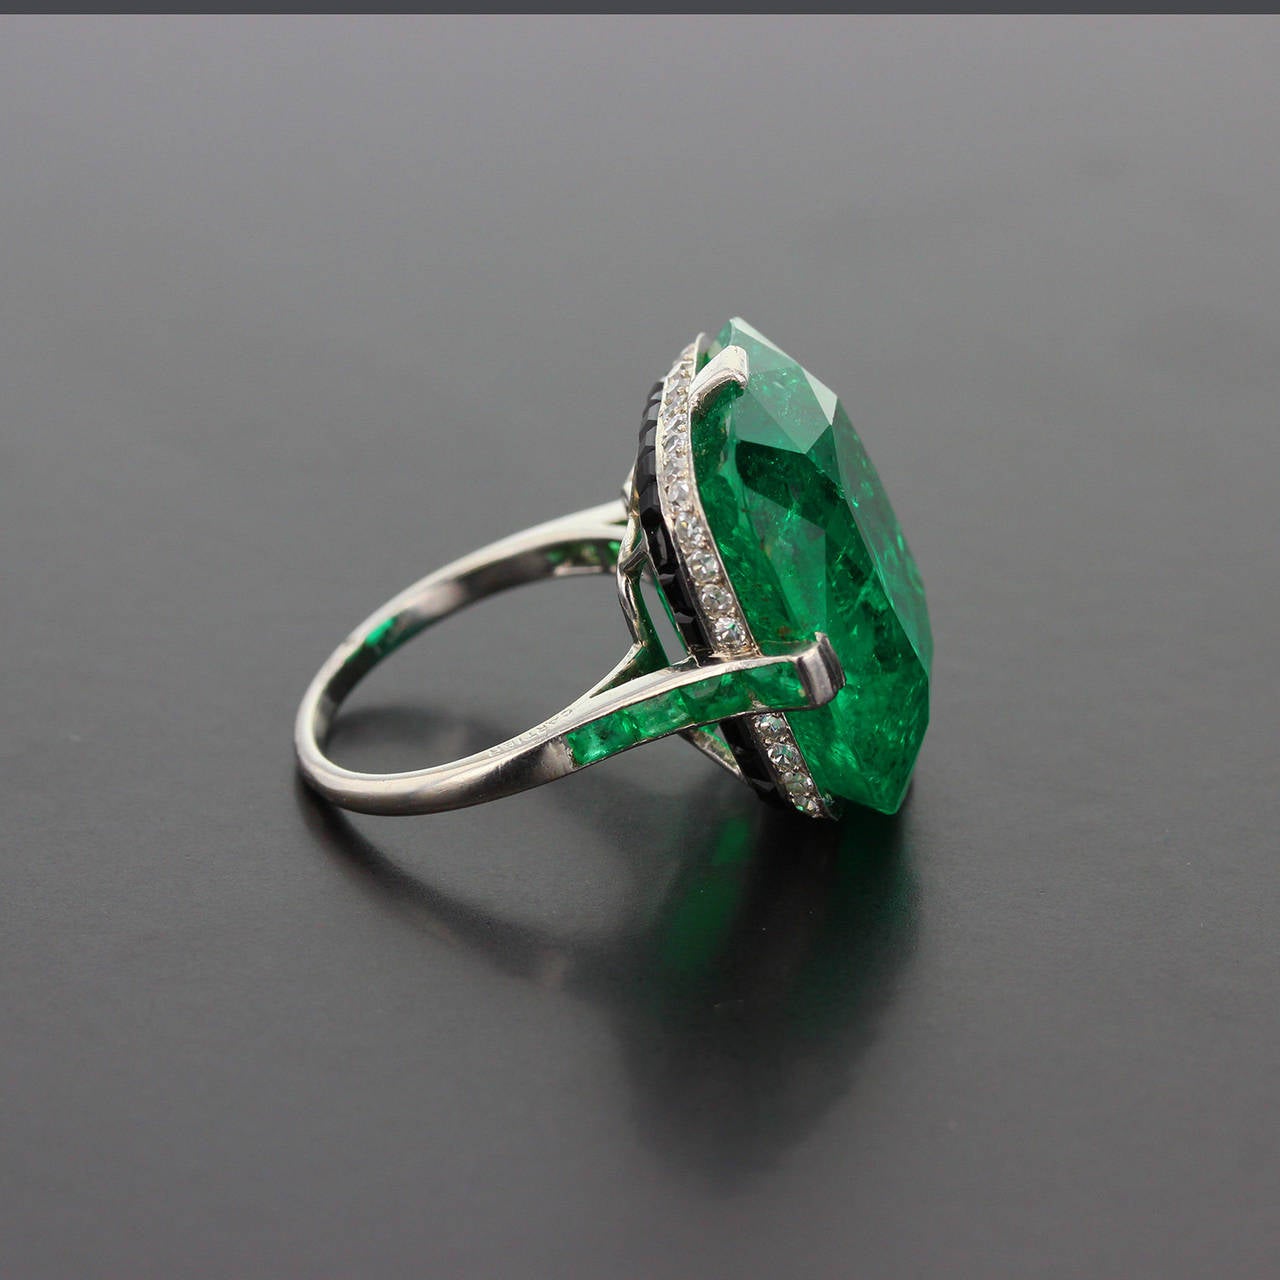 Cartier Important Art Deco Colombian Emerald Onyx Platinum Cocktail Ring For Sale 5